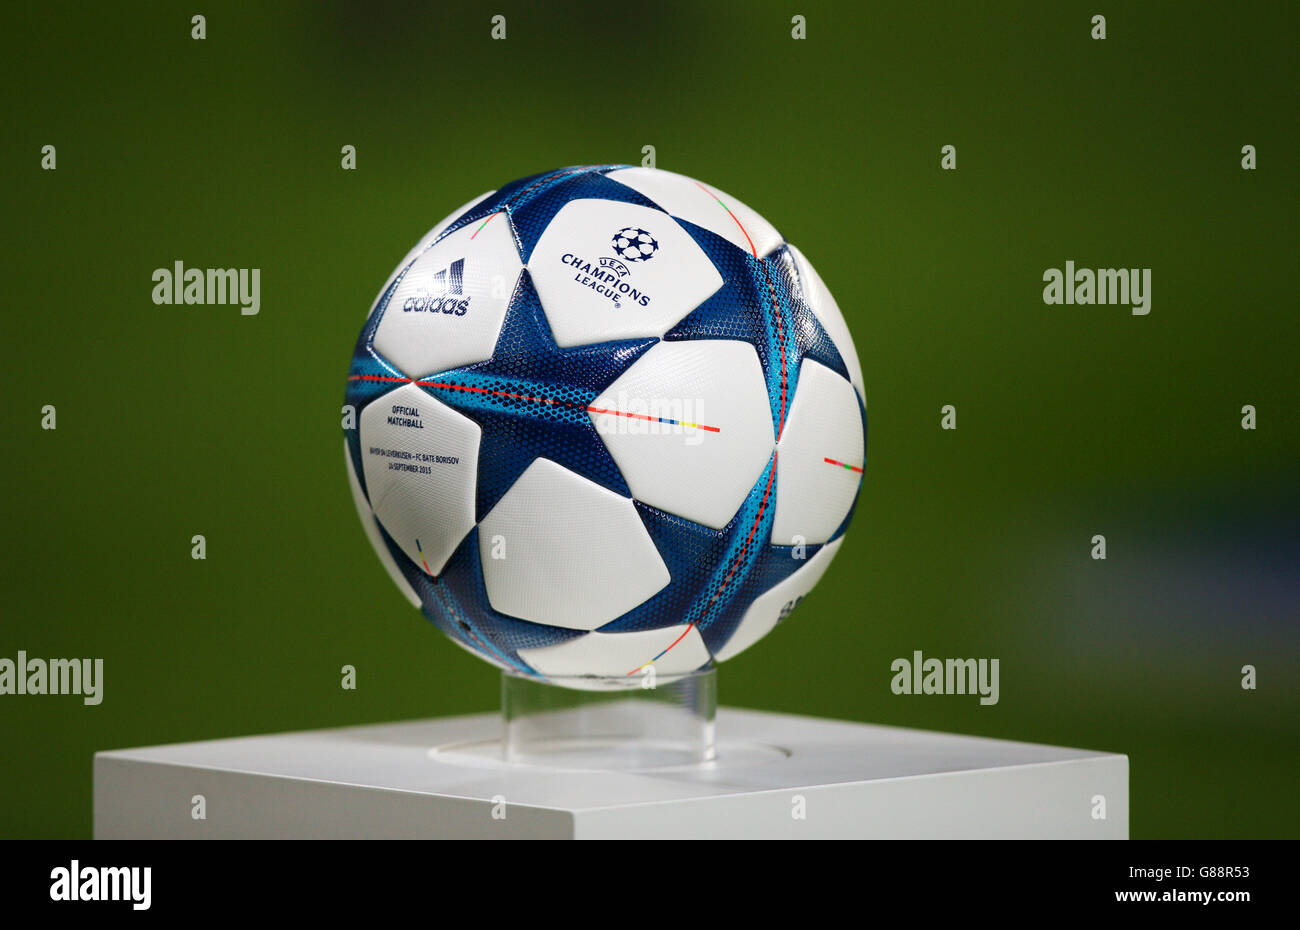 Champions league finale hi-res stock photography and images - Alamy